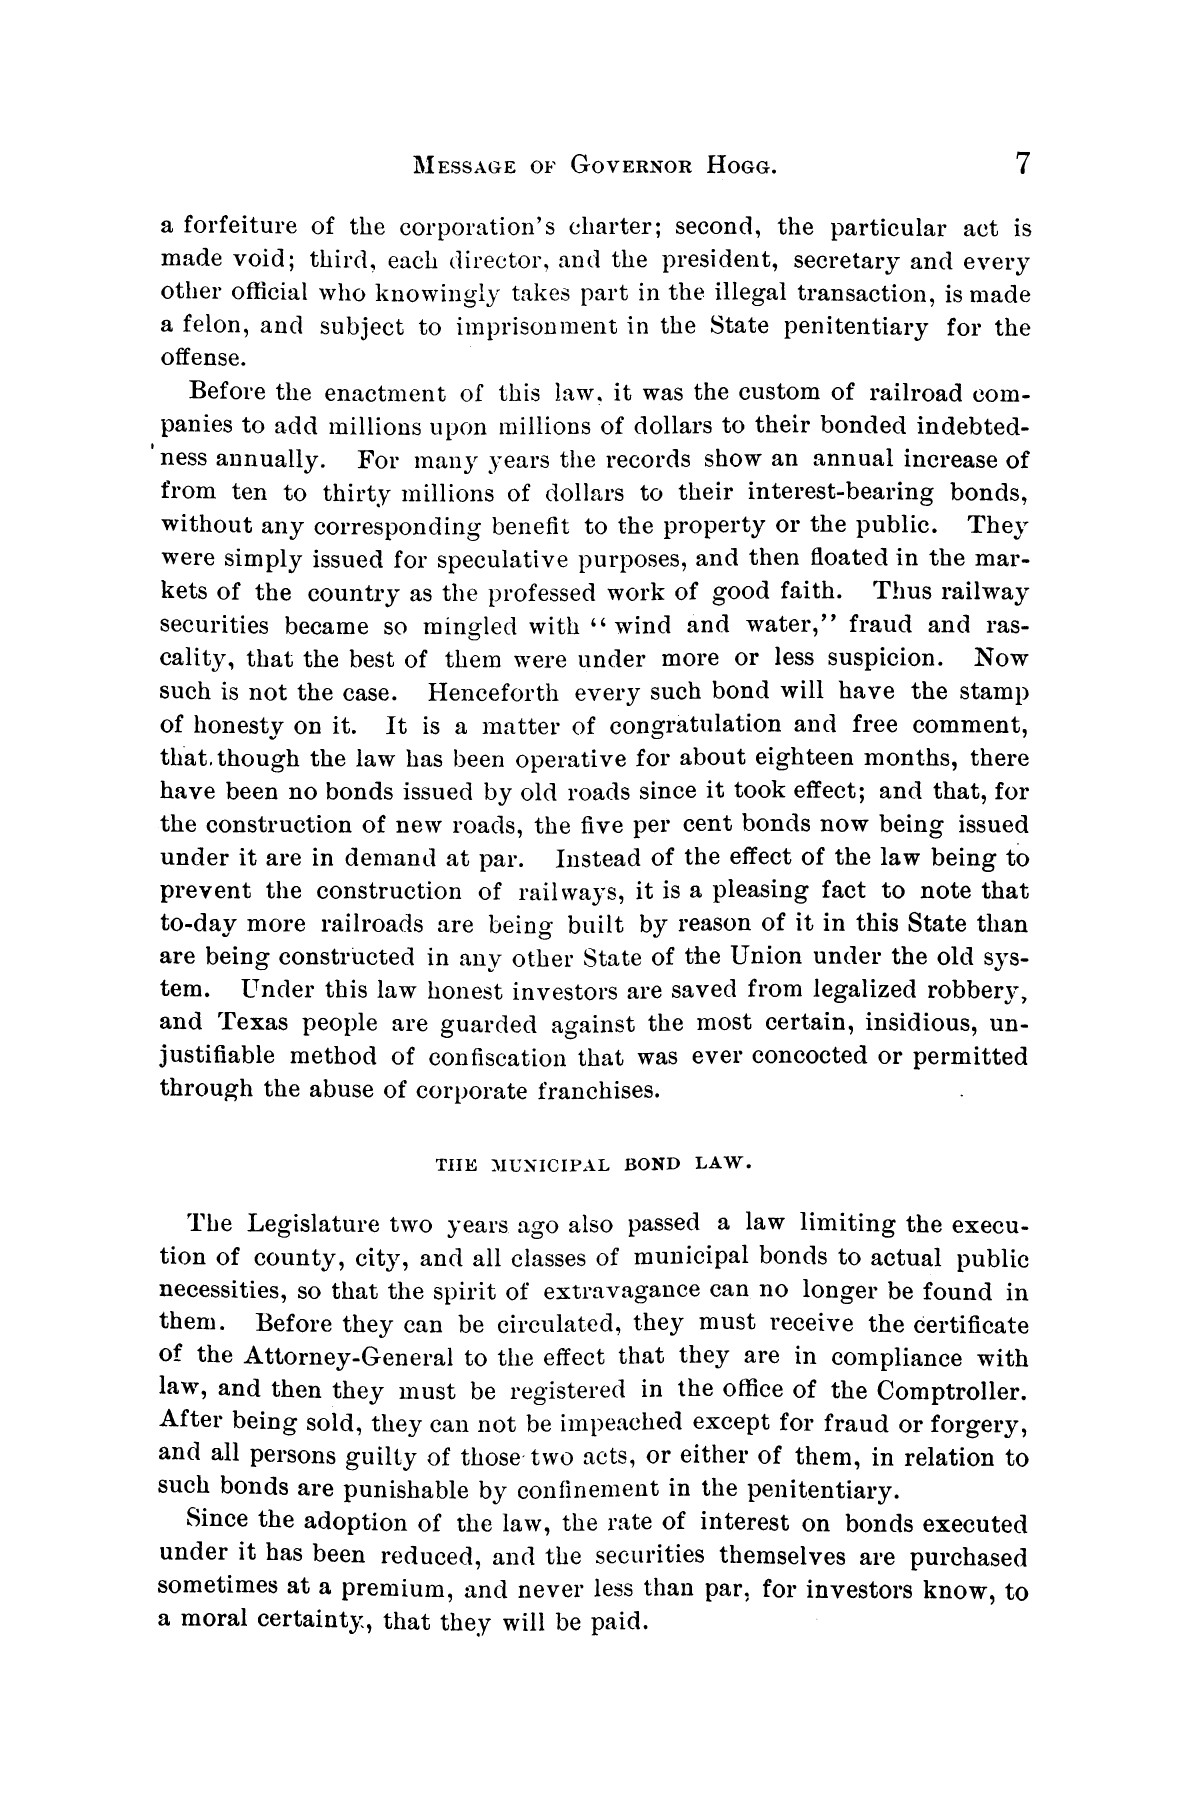 Message of Governor James S. Hogg to the twenty-fourth legislature of Texas
                                                
                                                    [Sequence #]: 7 of 48
                                                